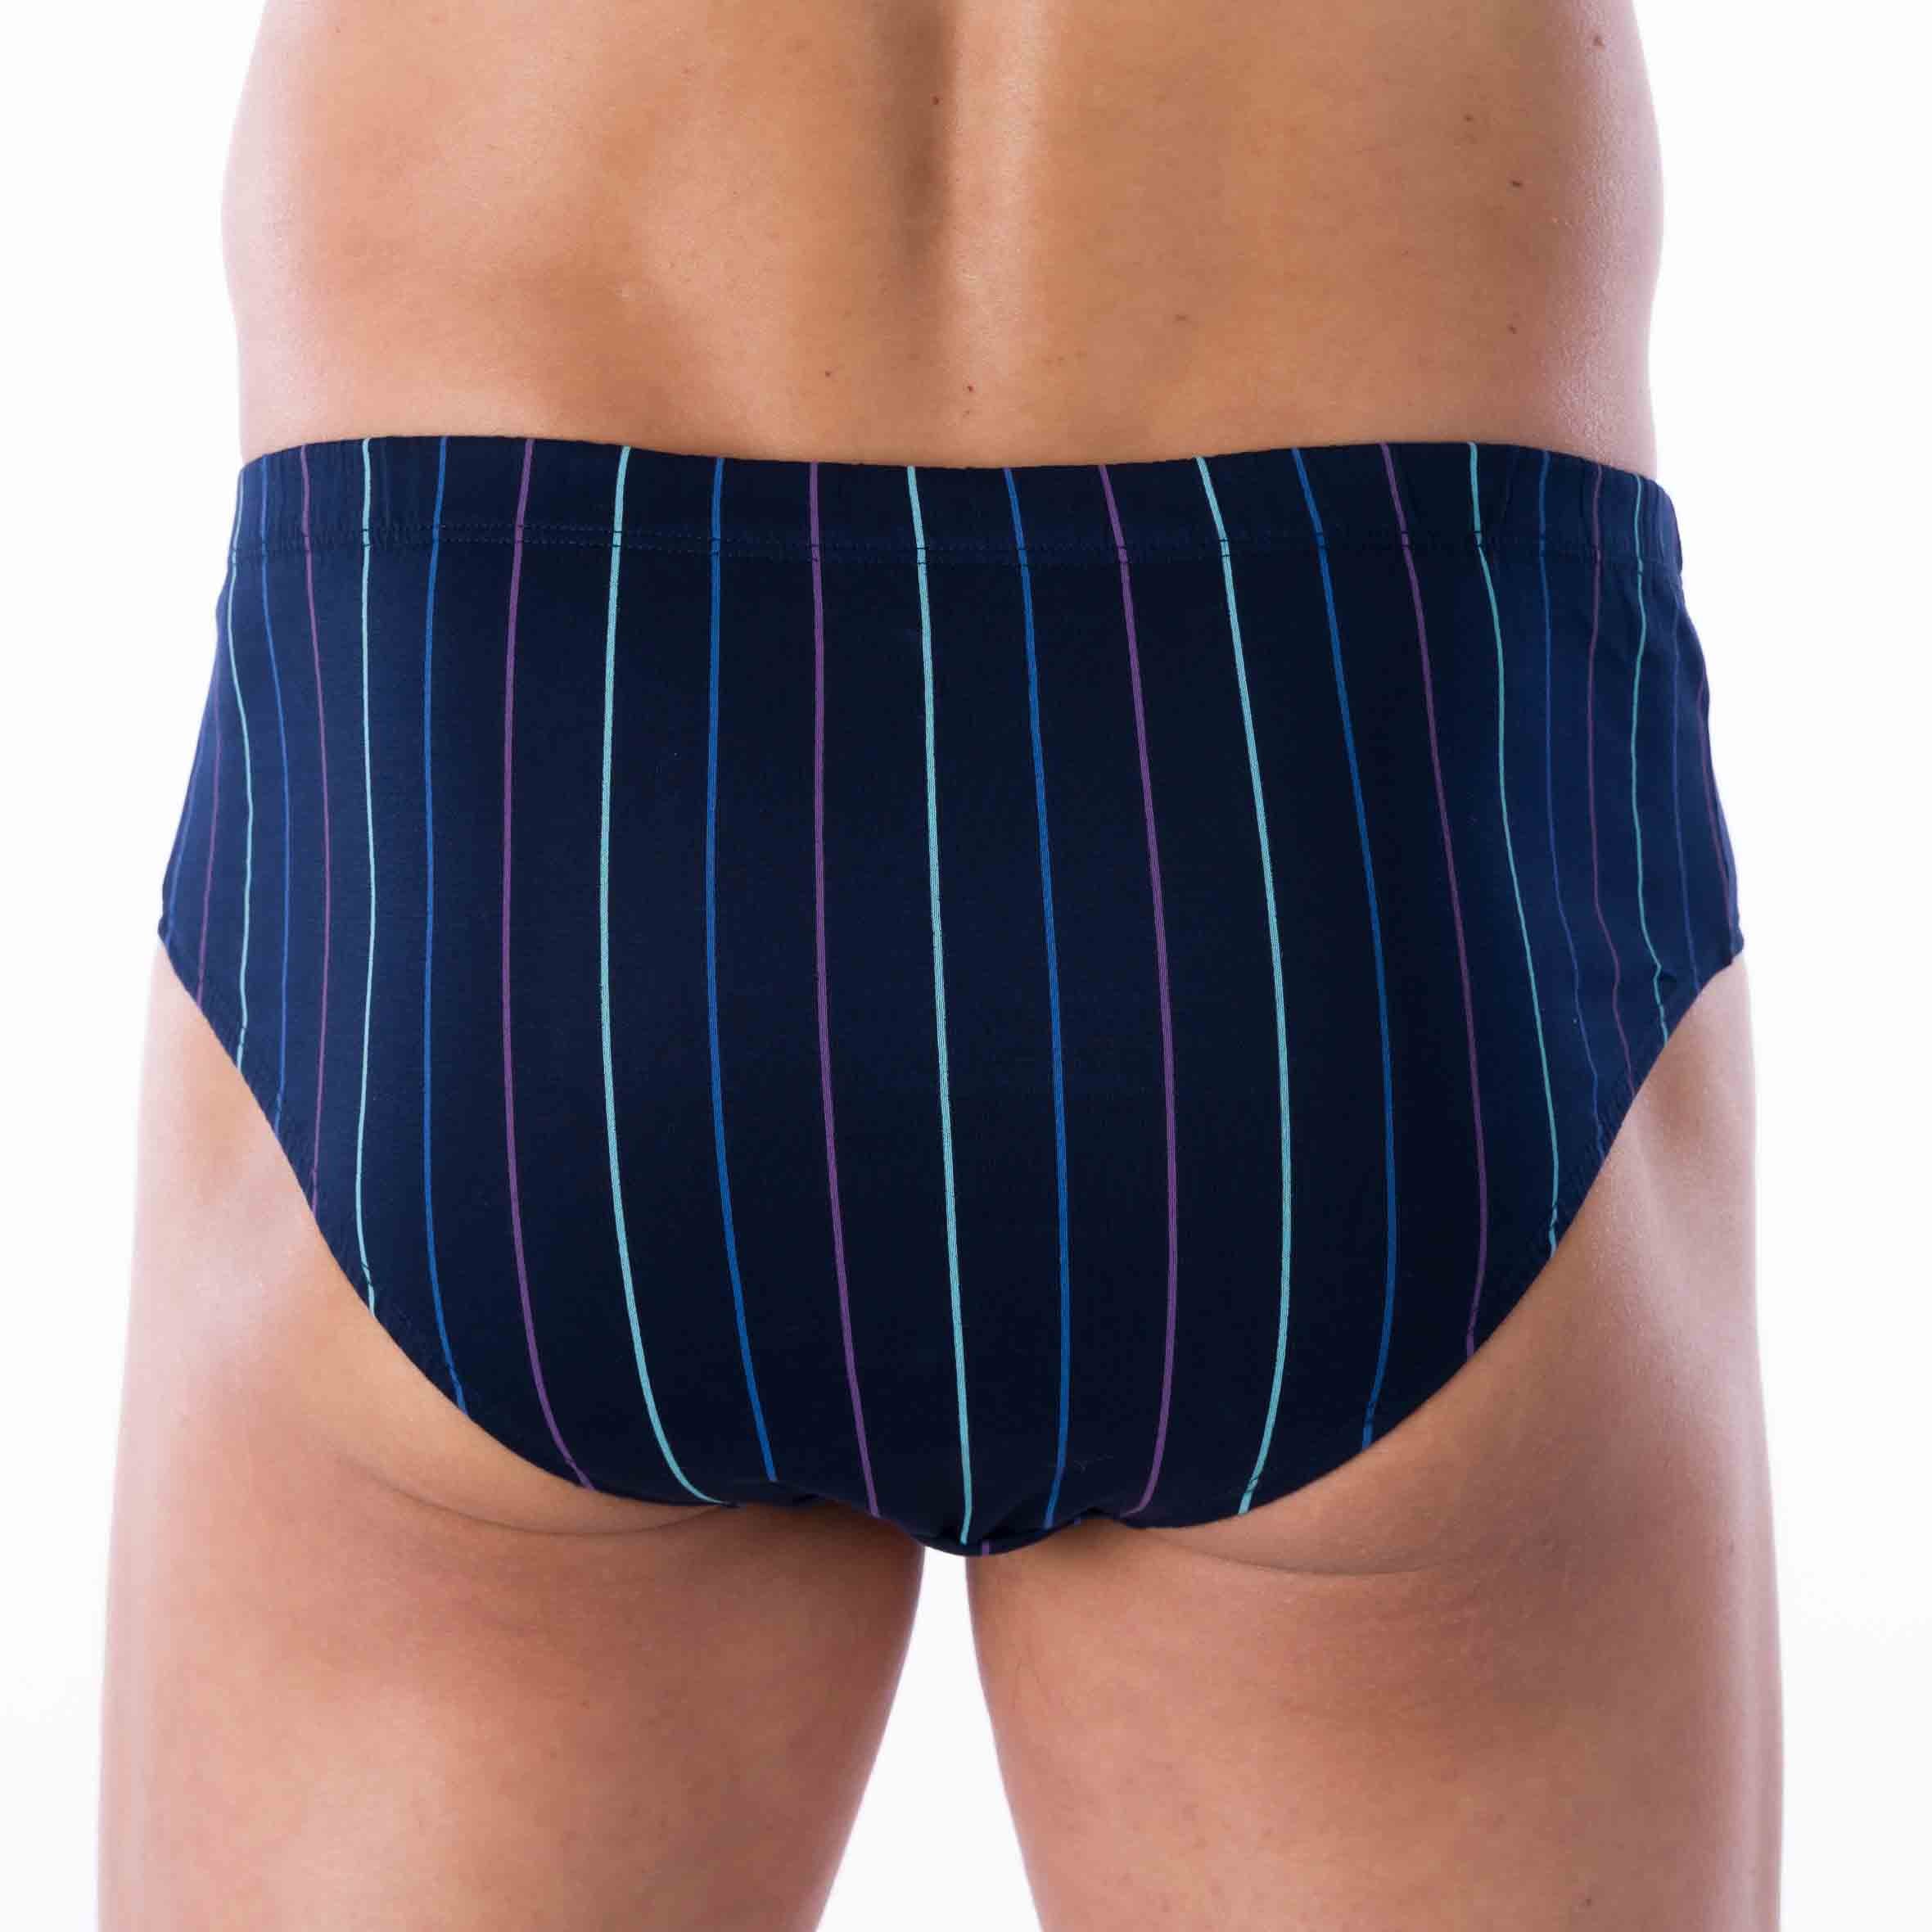 Pack of 2 HIGH Waist Briefs in NAVY and BLUE Printed Mercerized Cotton Jersey